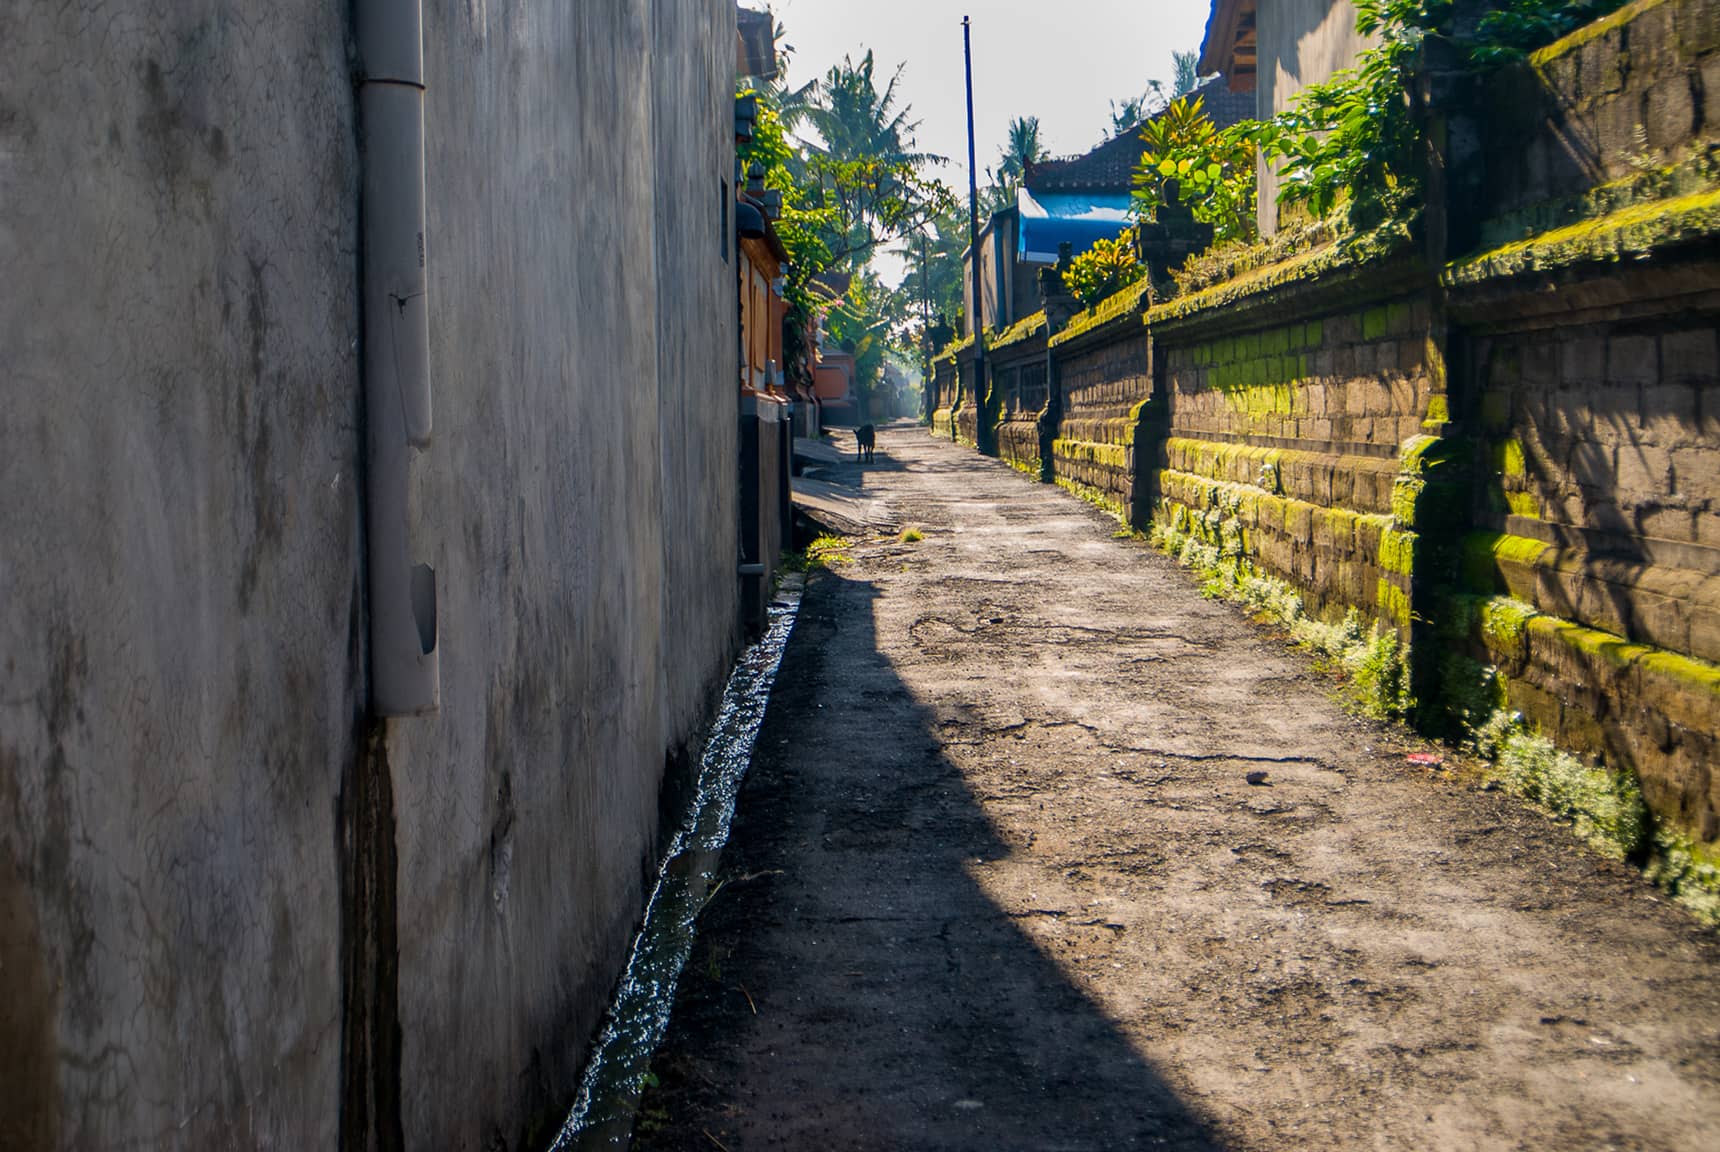 Professional photos of life in traditional Balinese villages - Desa Cemagi